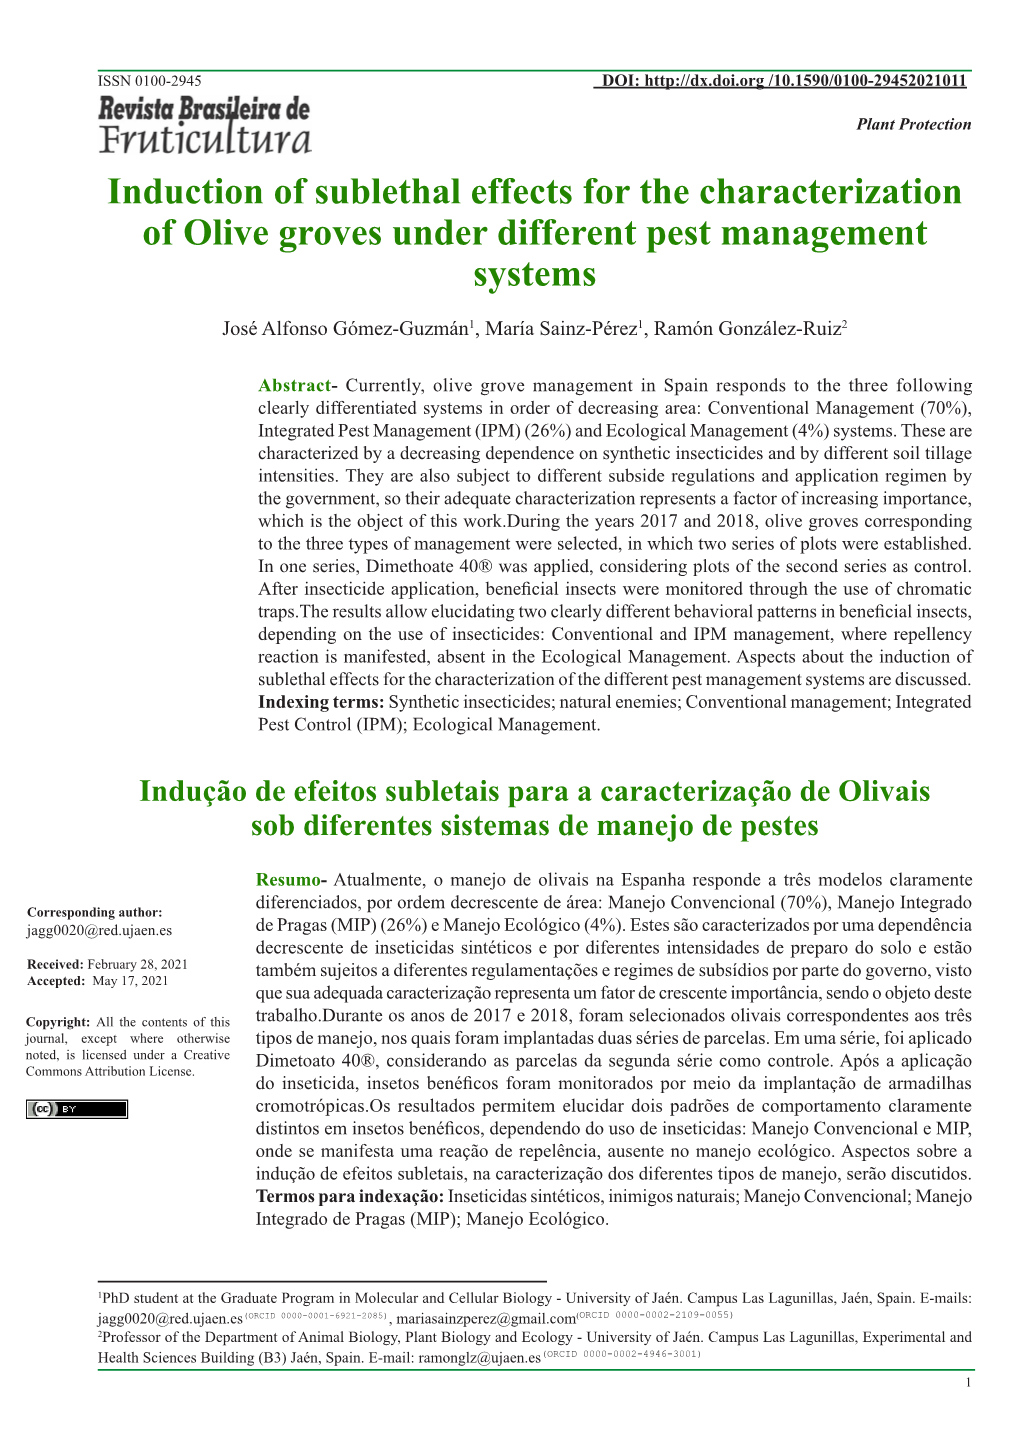 Induction of Sublethal Effects for the Characterization of Olive Groves Under Different Pest Management Systems